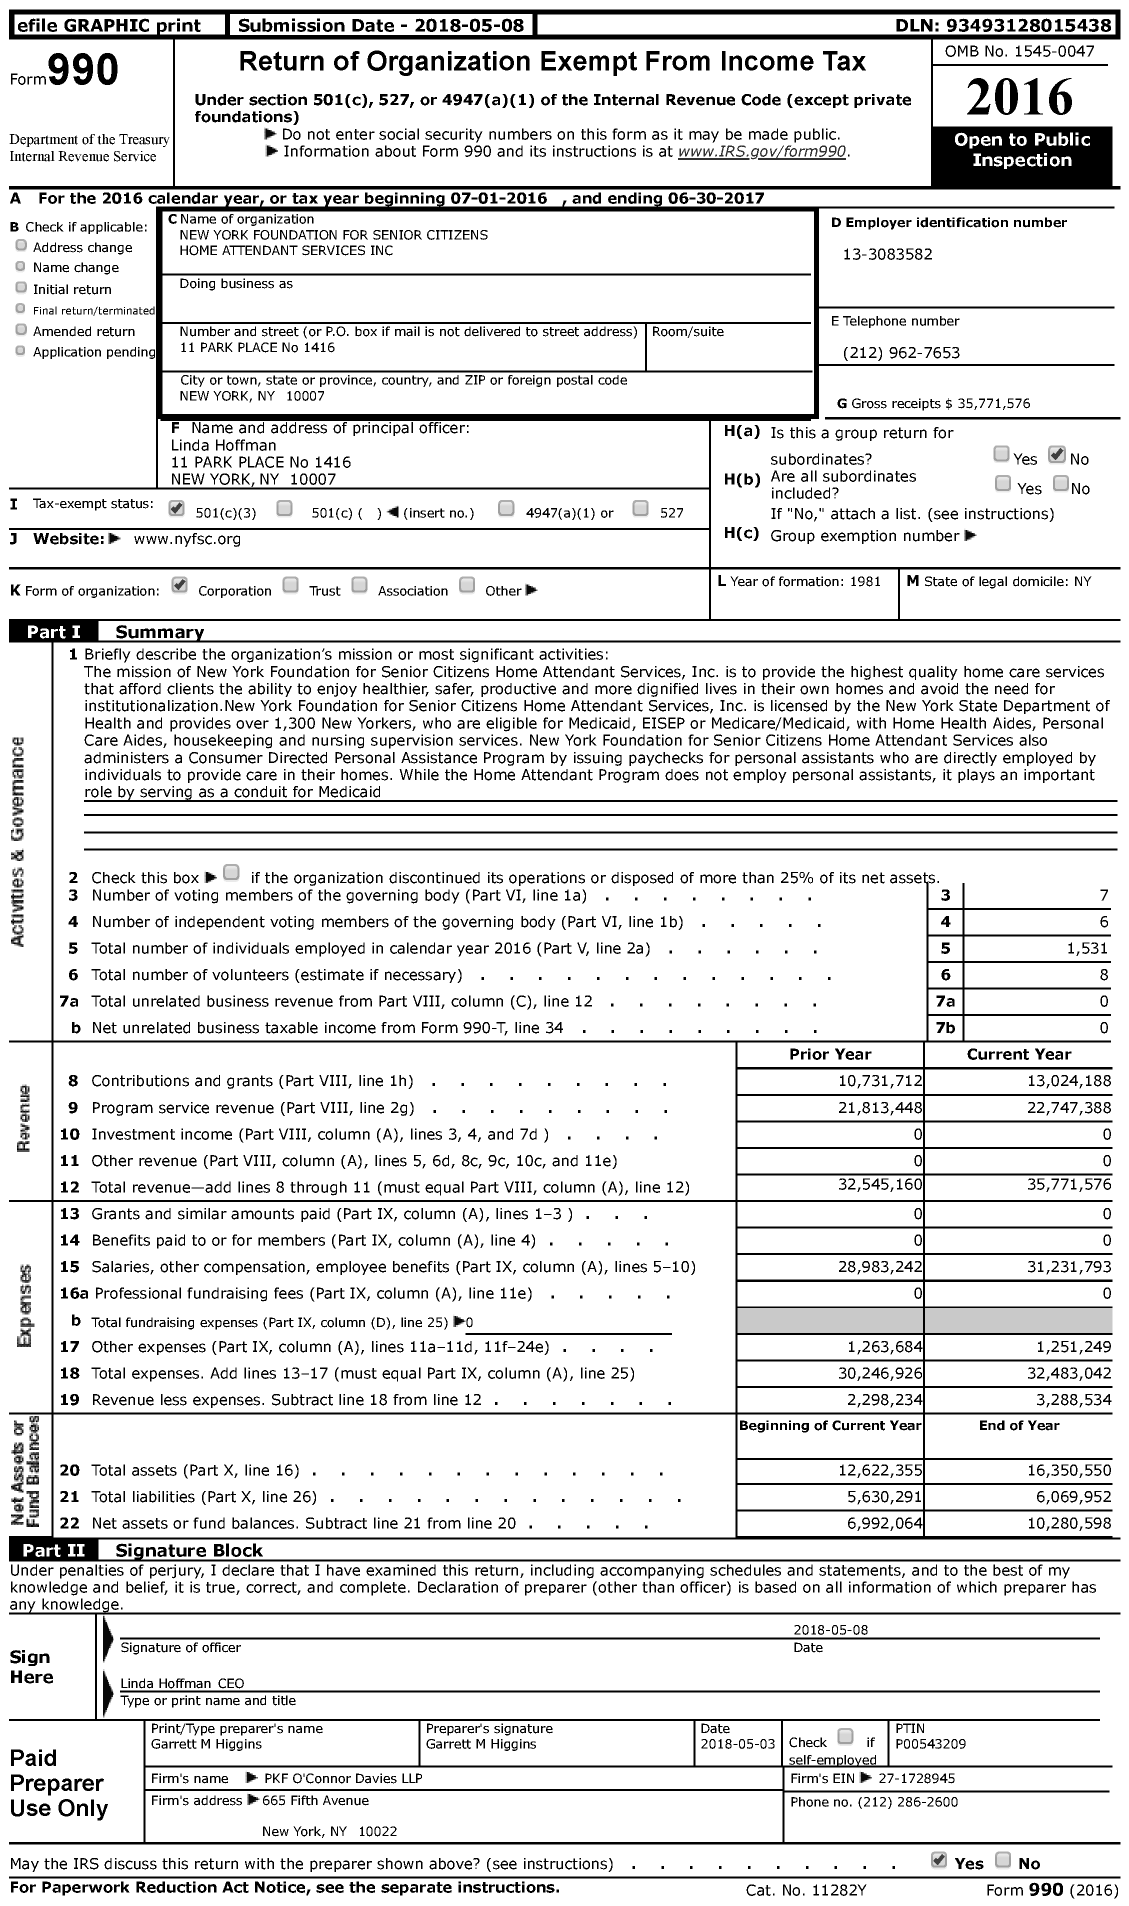 Image of first page of 2016 Form 990 for New York Foundation for Senior Citizens Home Attendant Services